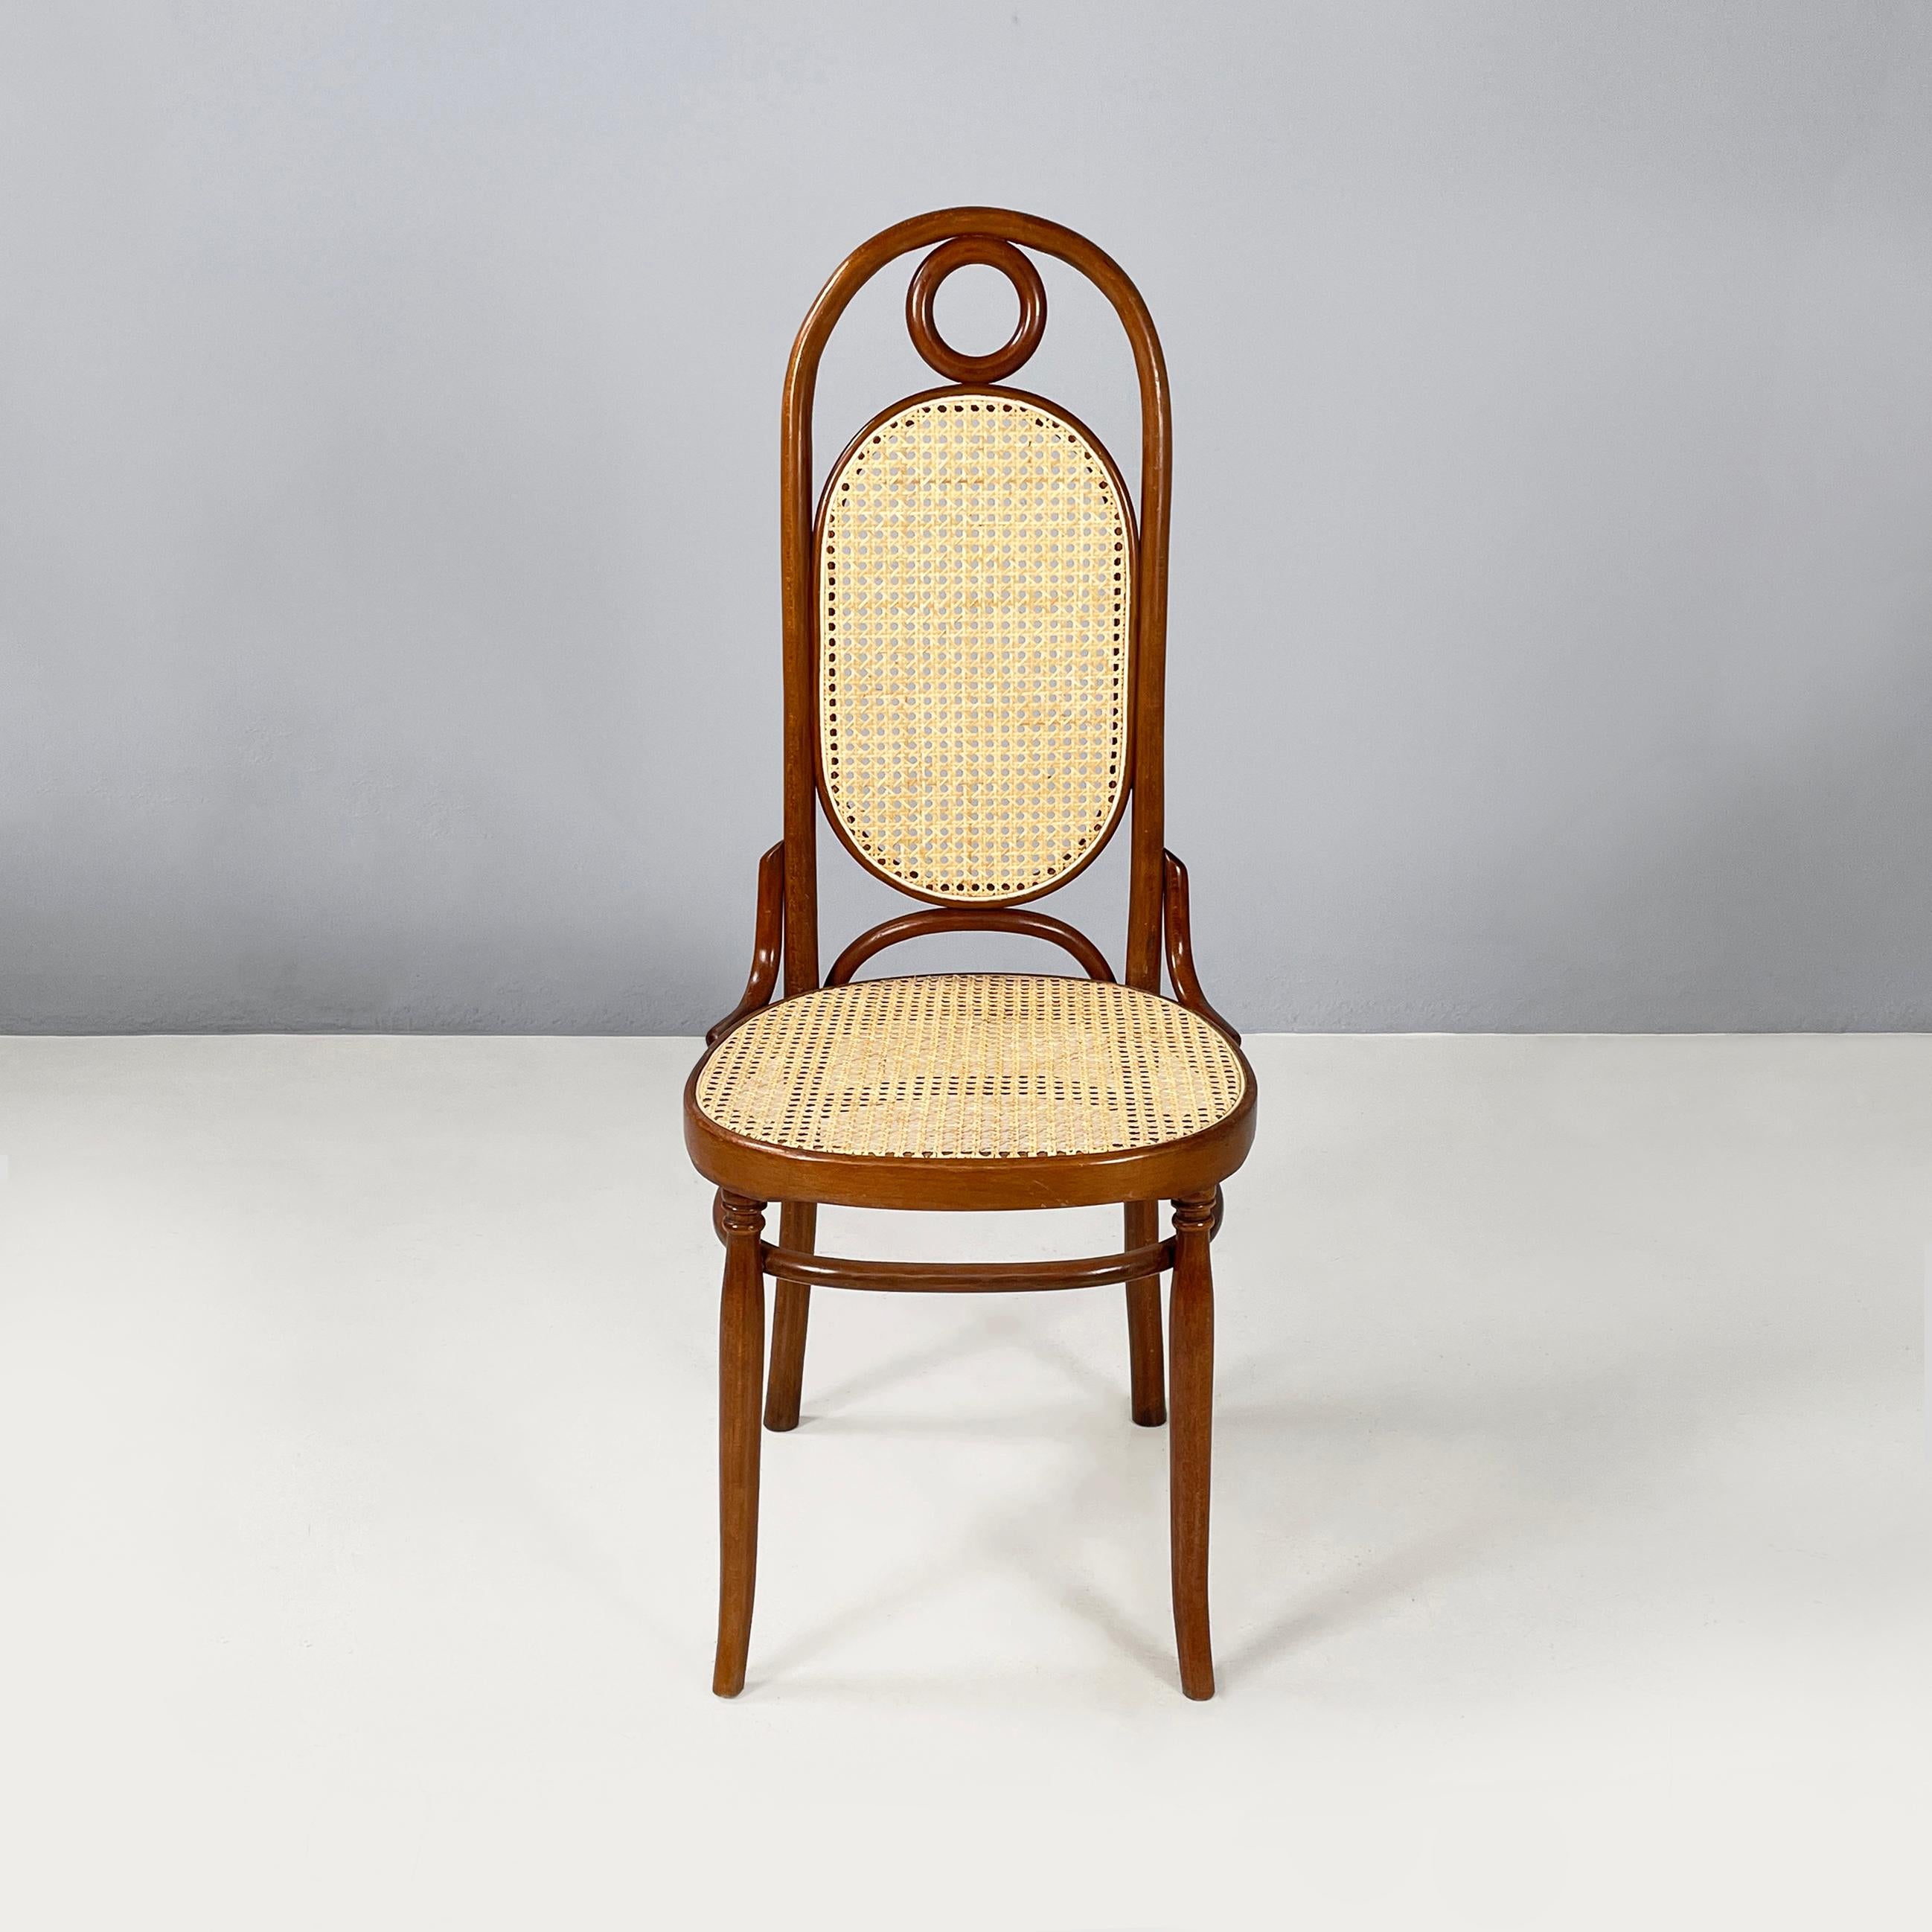 Italian Chair in straw and wood, 1900-1950s
Chair with squared seat with rounded corners in straw with wooden profiles. The semi-oval straw backrest features a decorative circle at the top and a wooden structure. Wooden legs with round